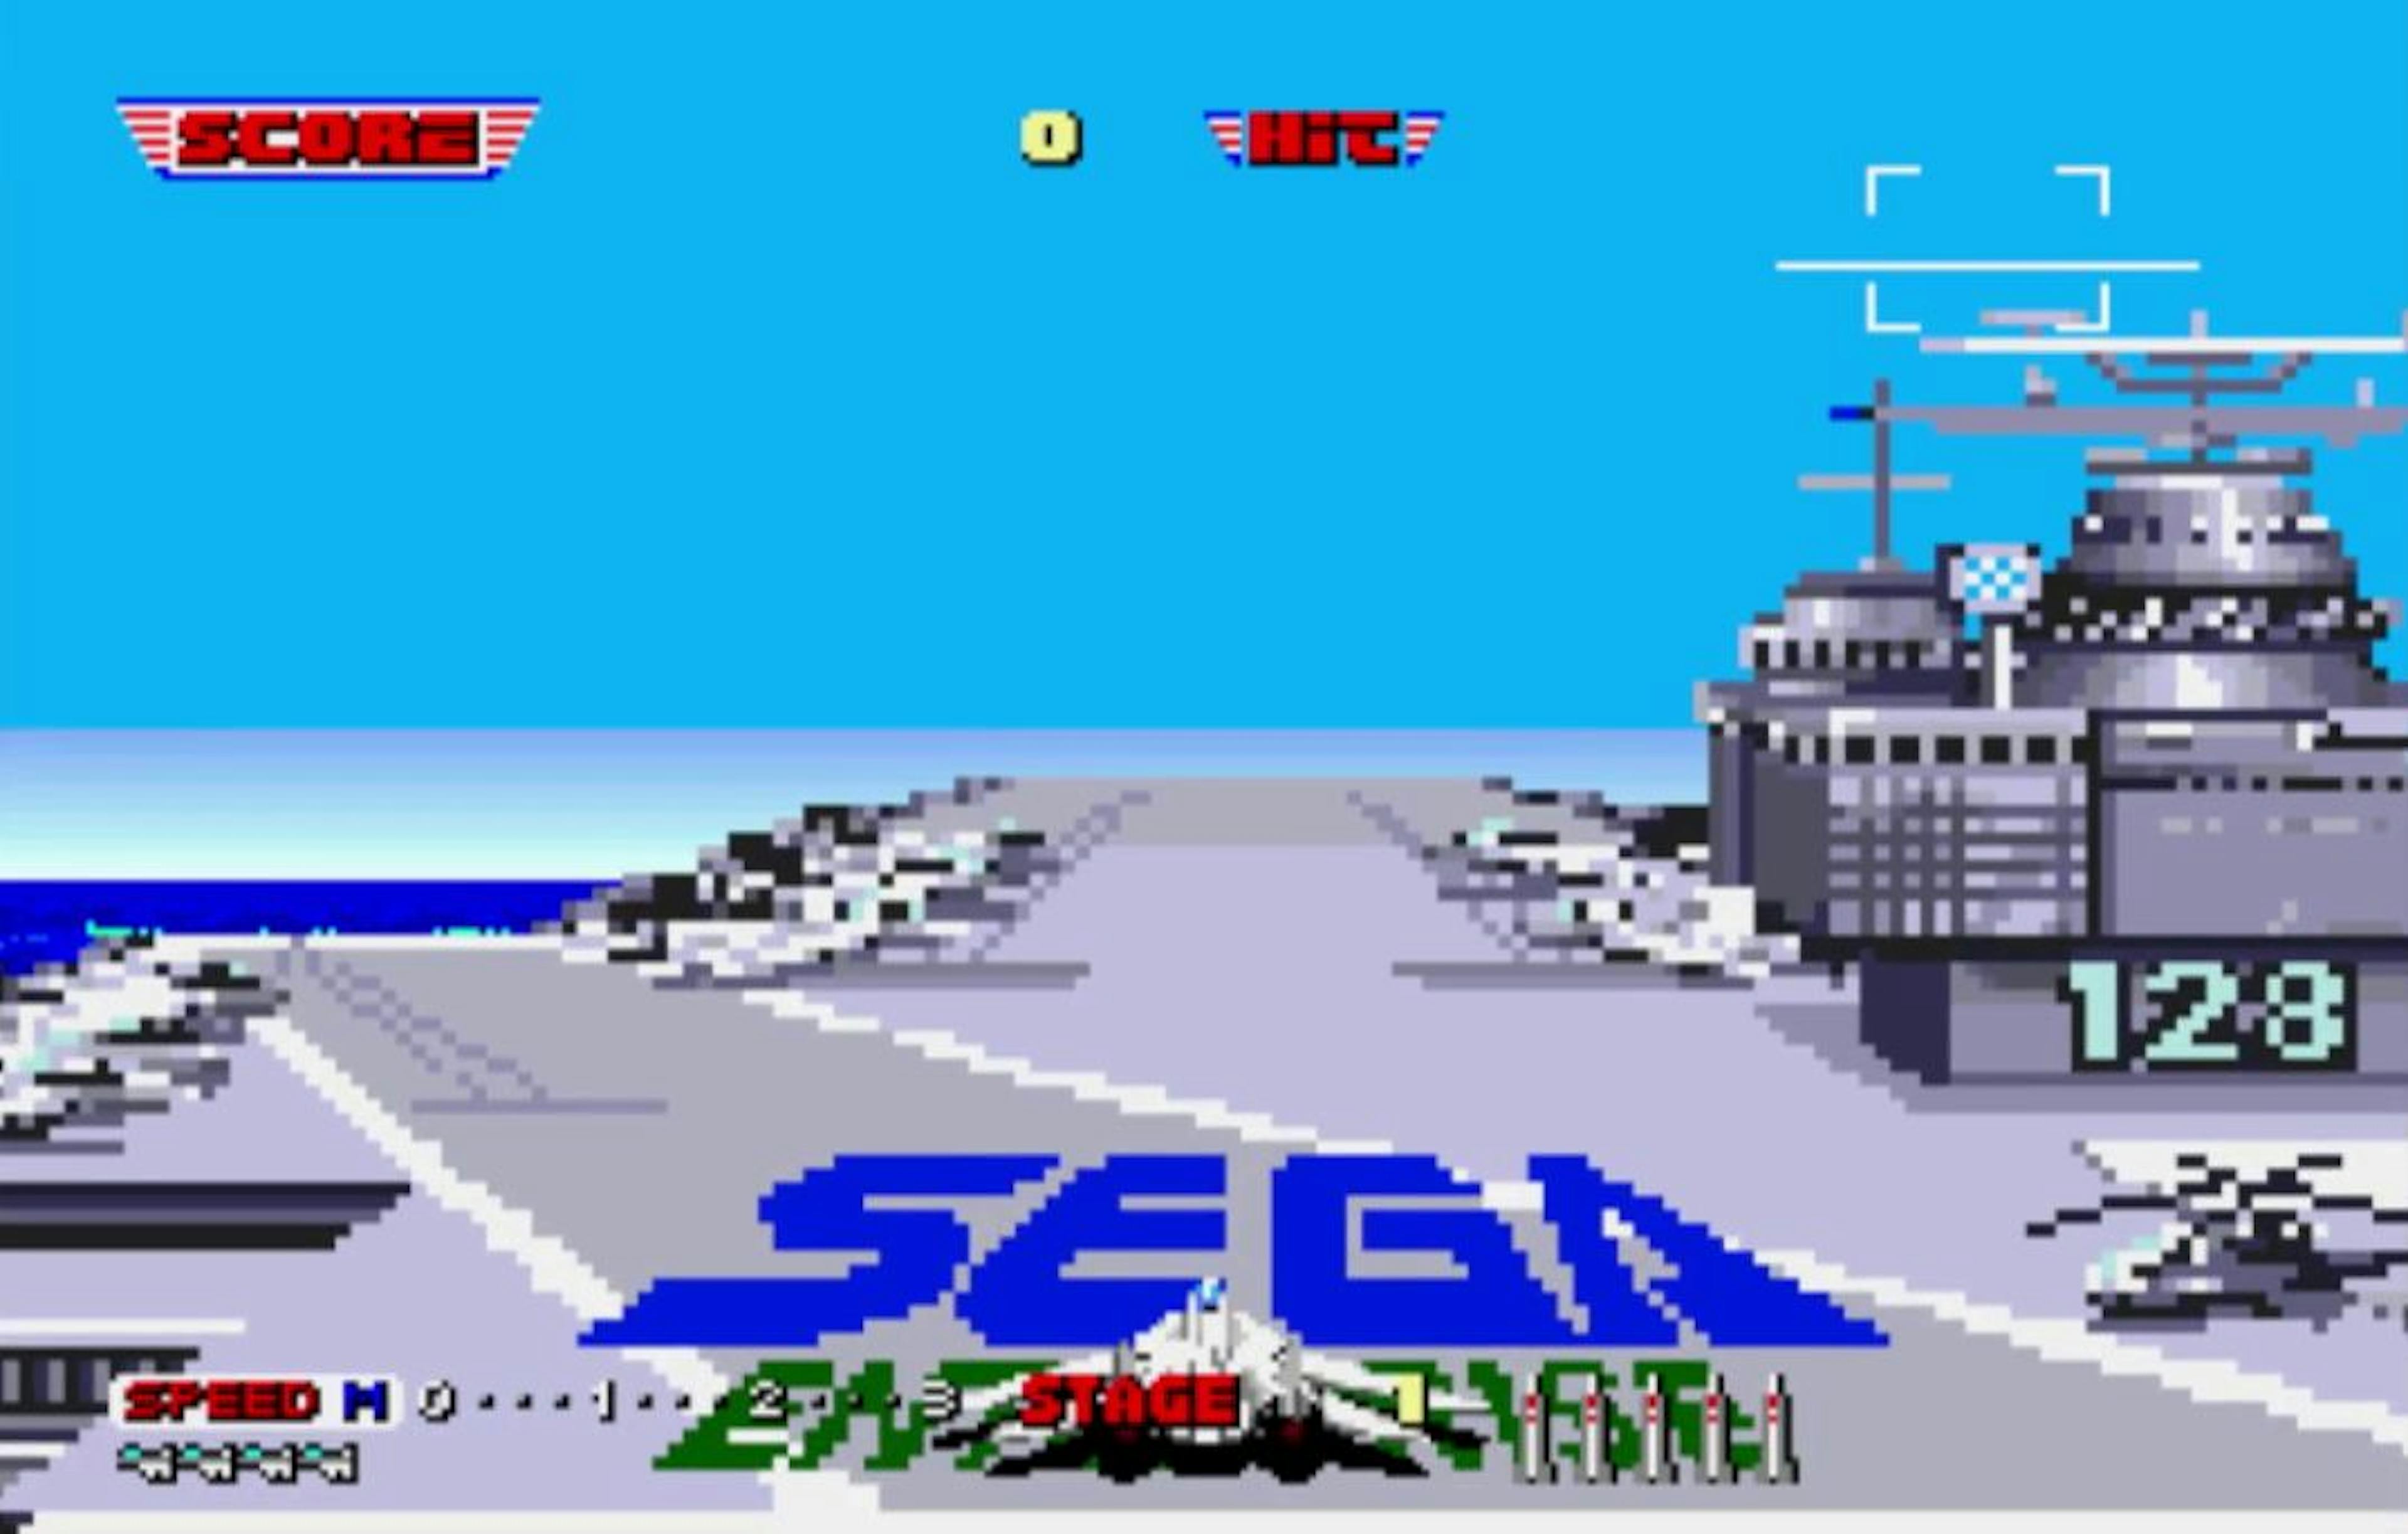 There's no two ways about it - this is essentially Top Gun: The Arcade Game in all but name.